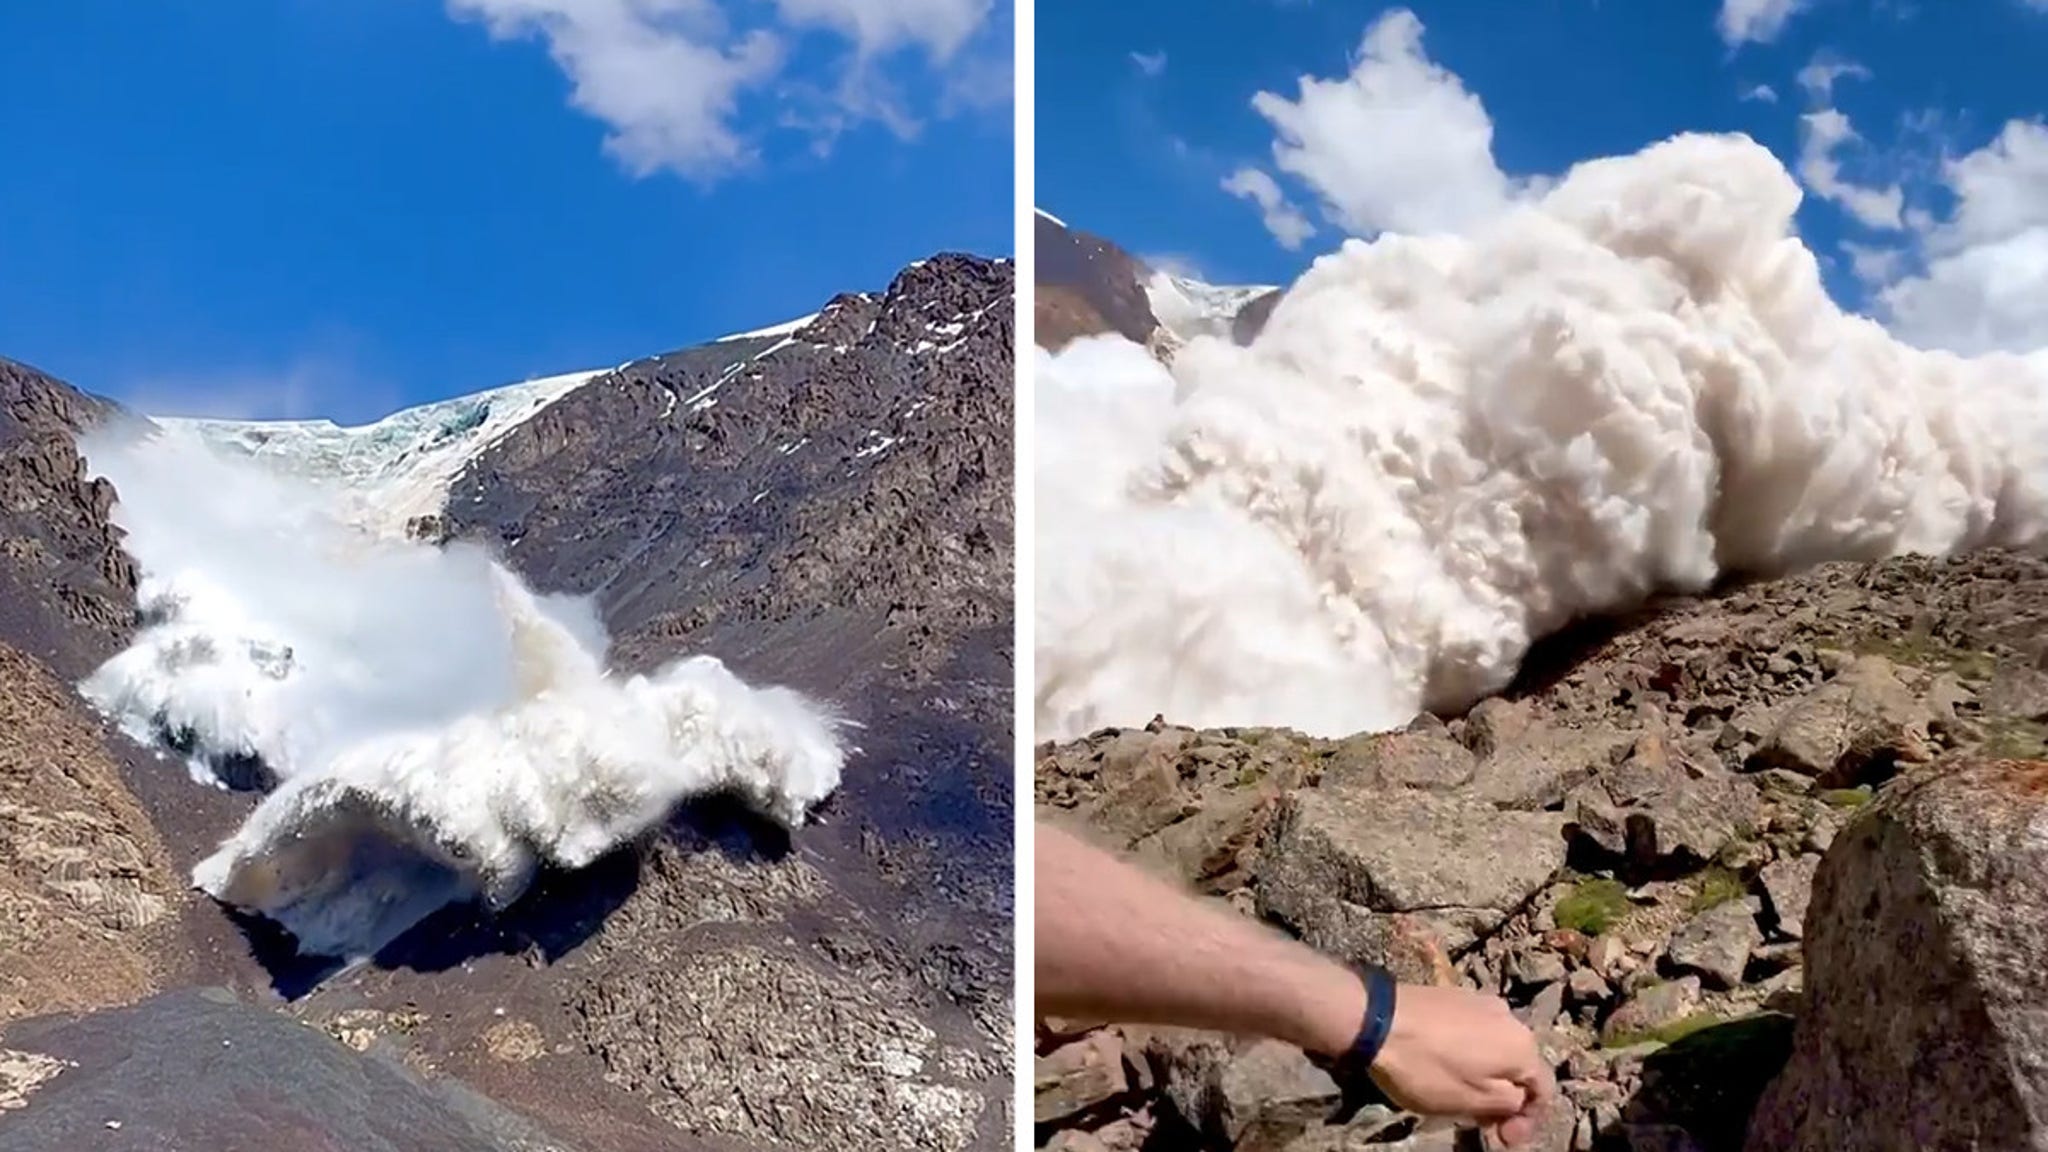 Massive Avalanche Captured on Camera, Almost Takes Out Photographer thumbnail